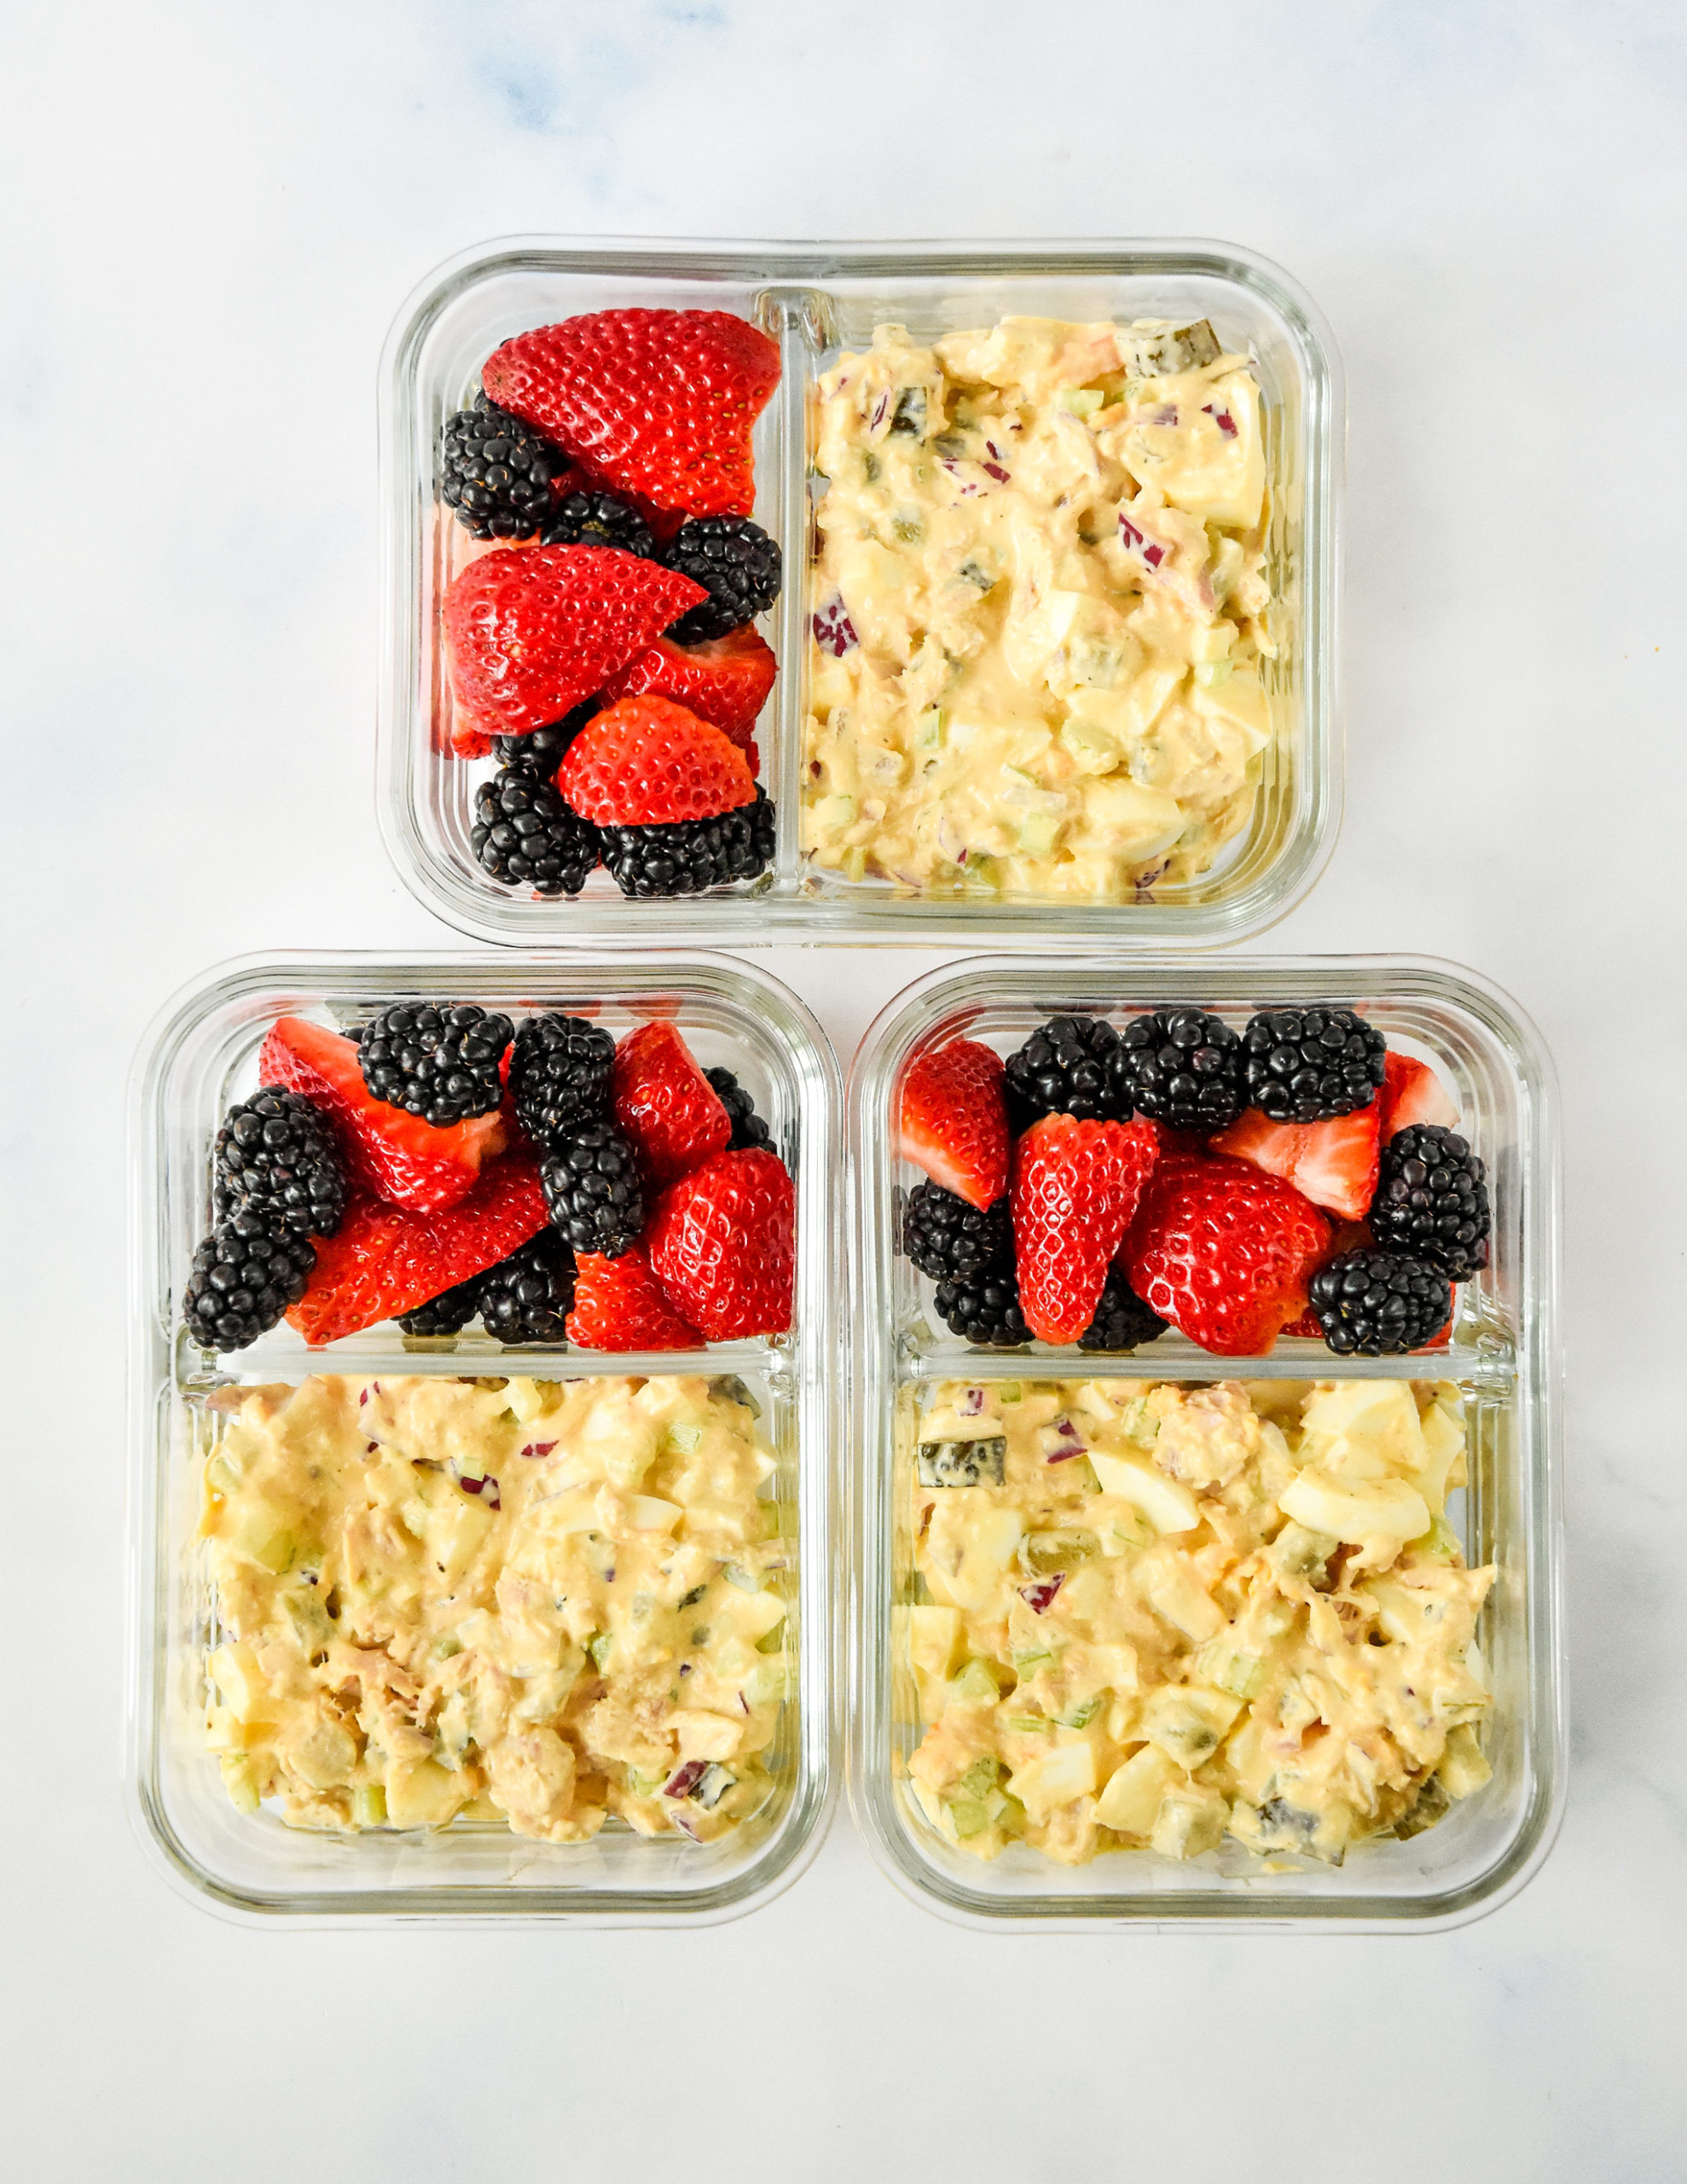 tuna egg salad meal prep in containers